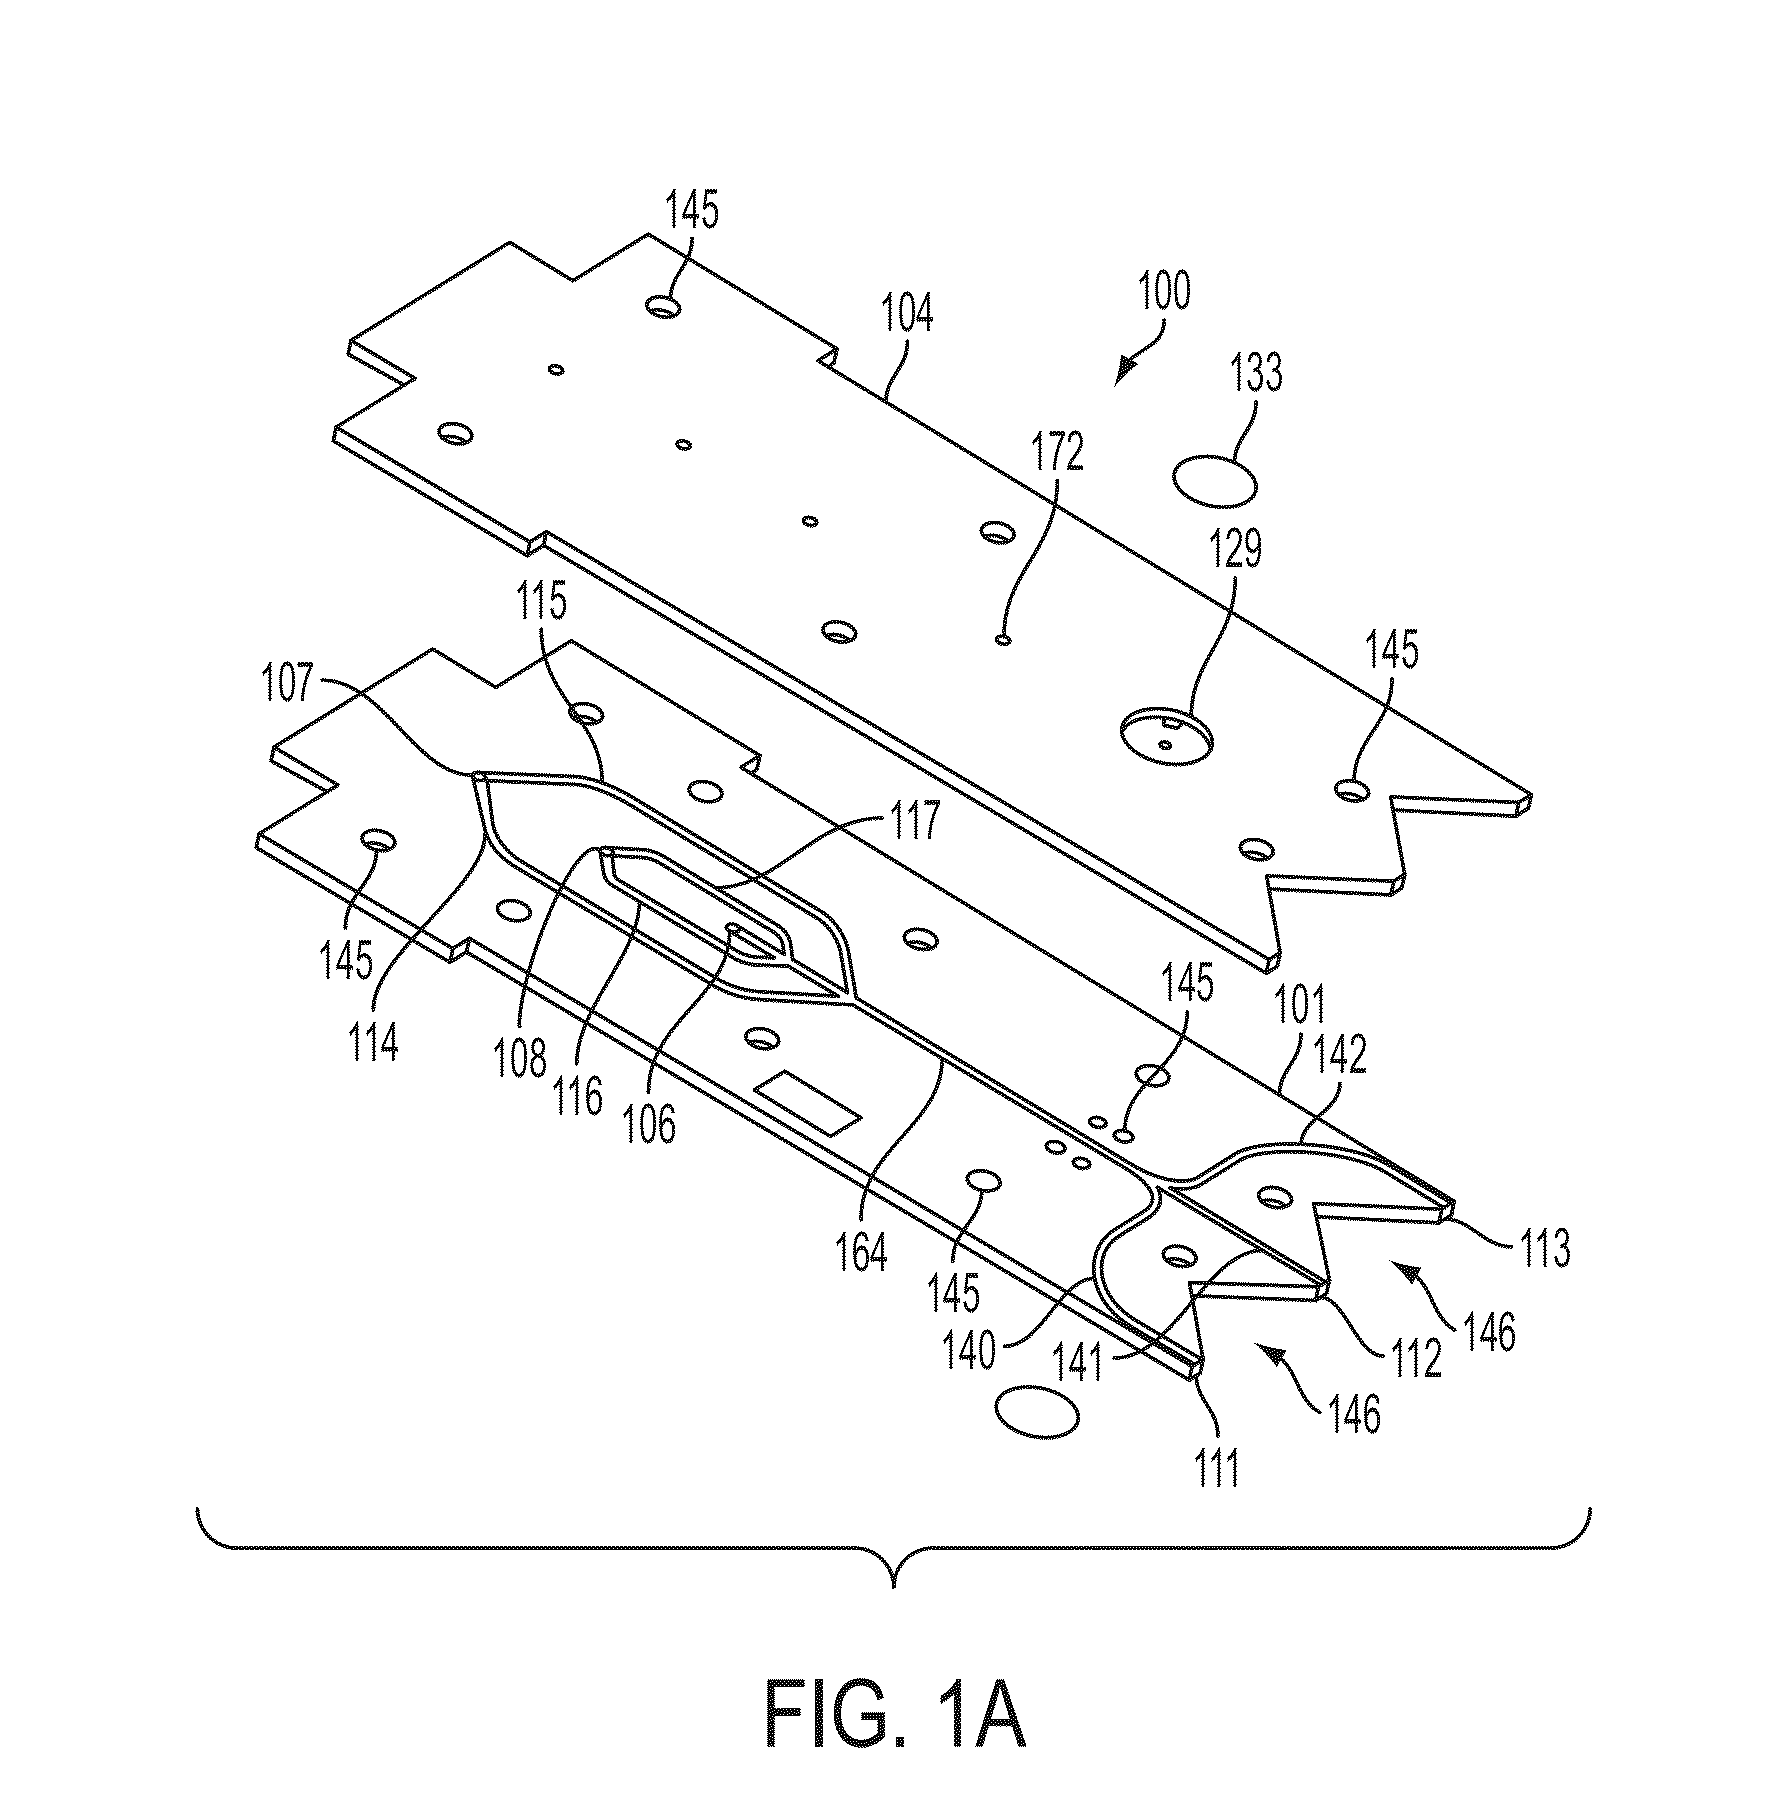 Microfluidic system and method with focused energy apparatus